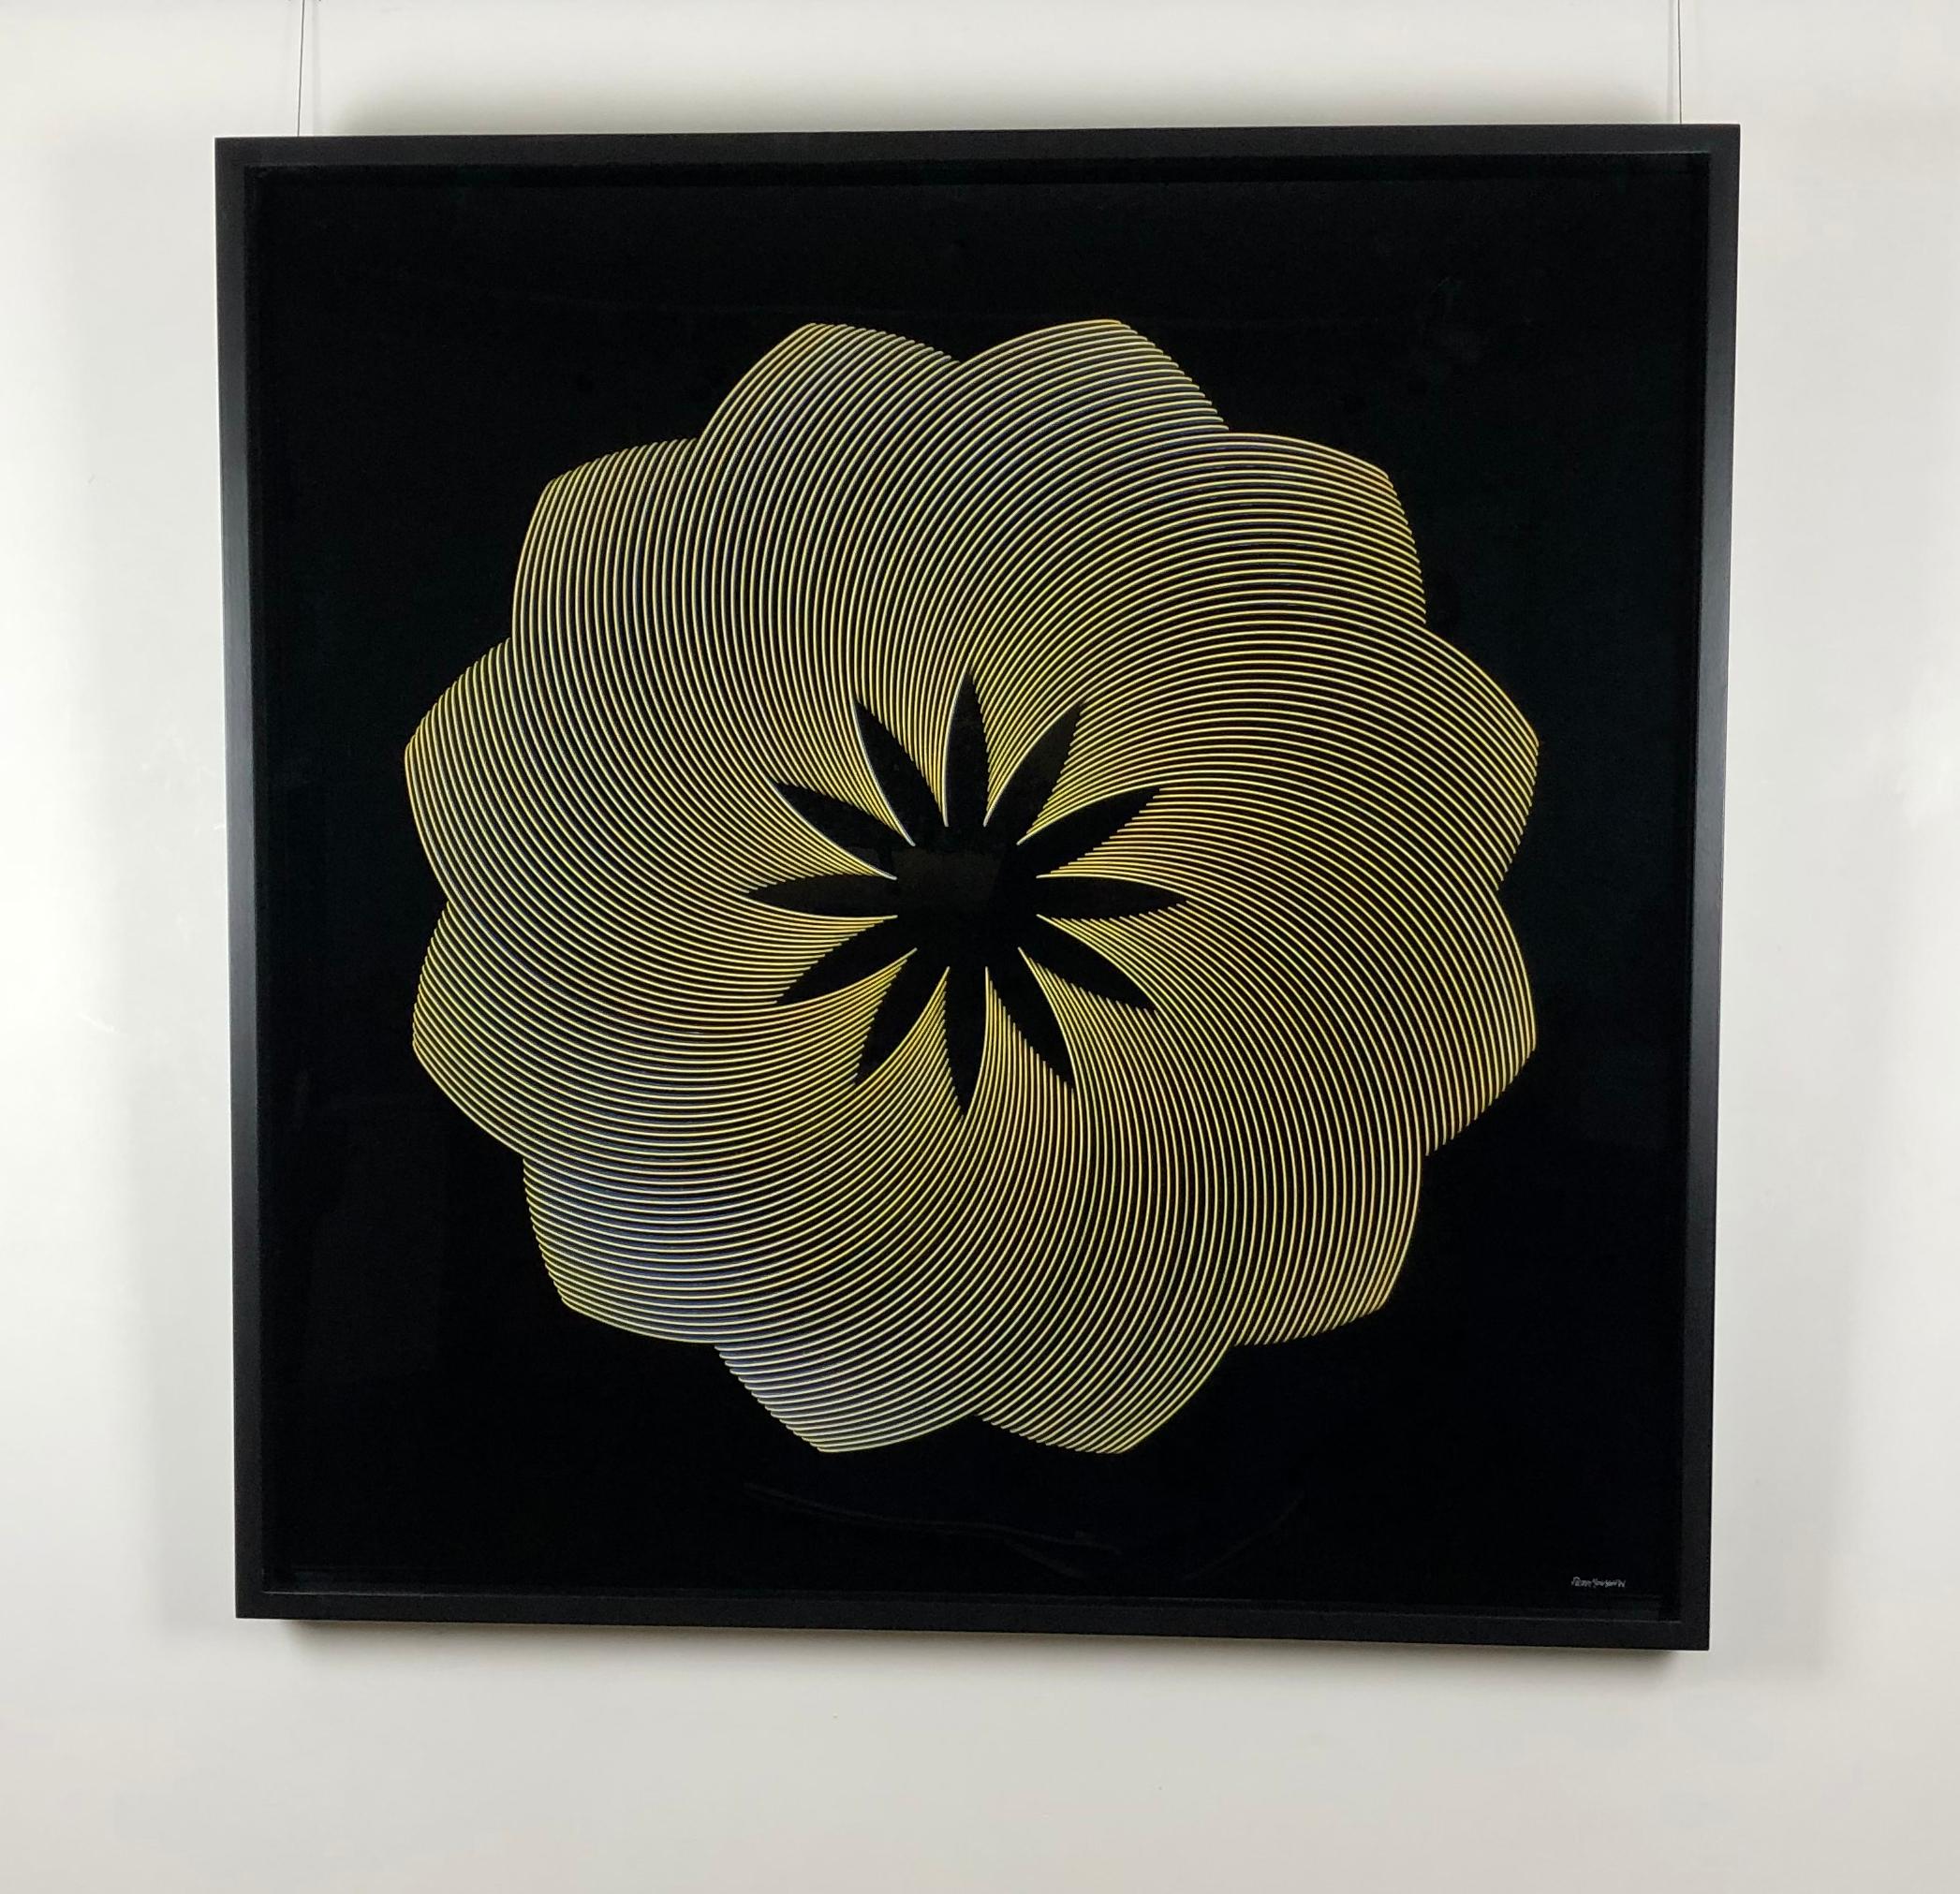 Lotus - Contemporary Mixed Media Art by Peter Monaghan